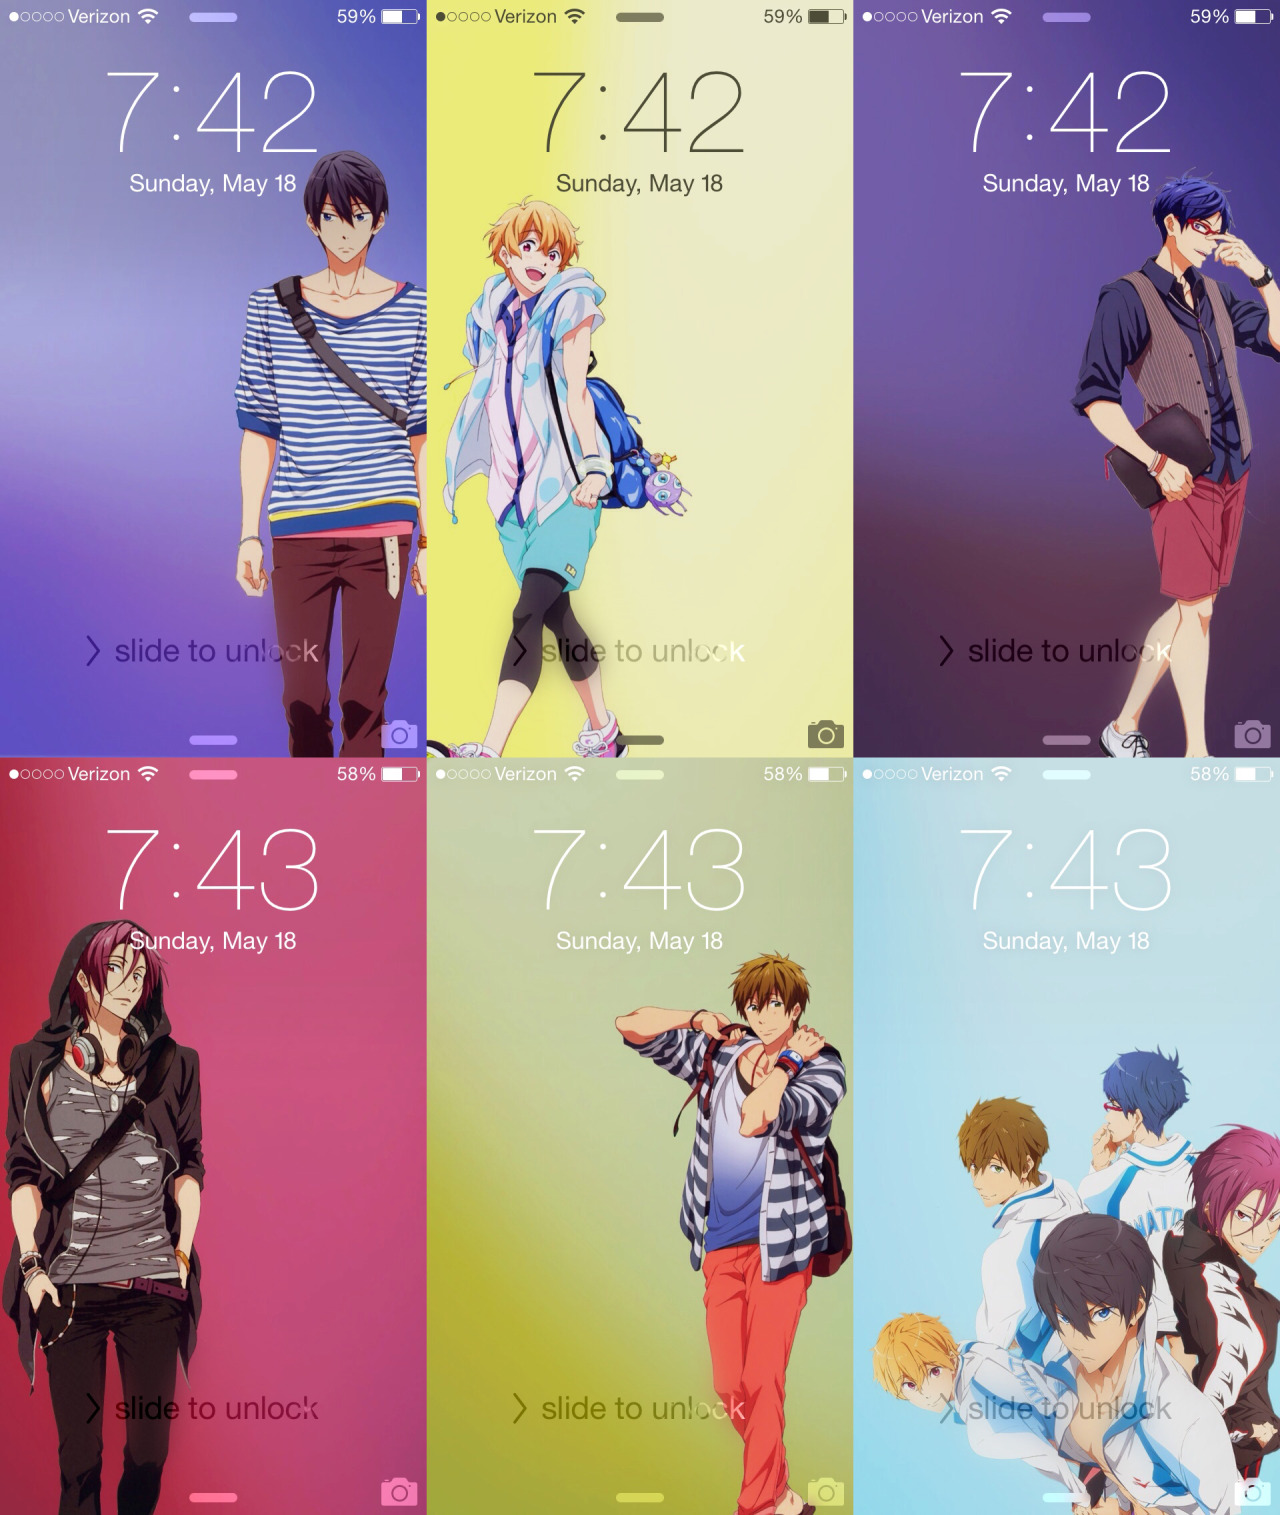 Cute Animated Boys, Free! iPhone 5 Backgrounds ( more anime...